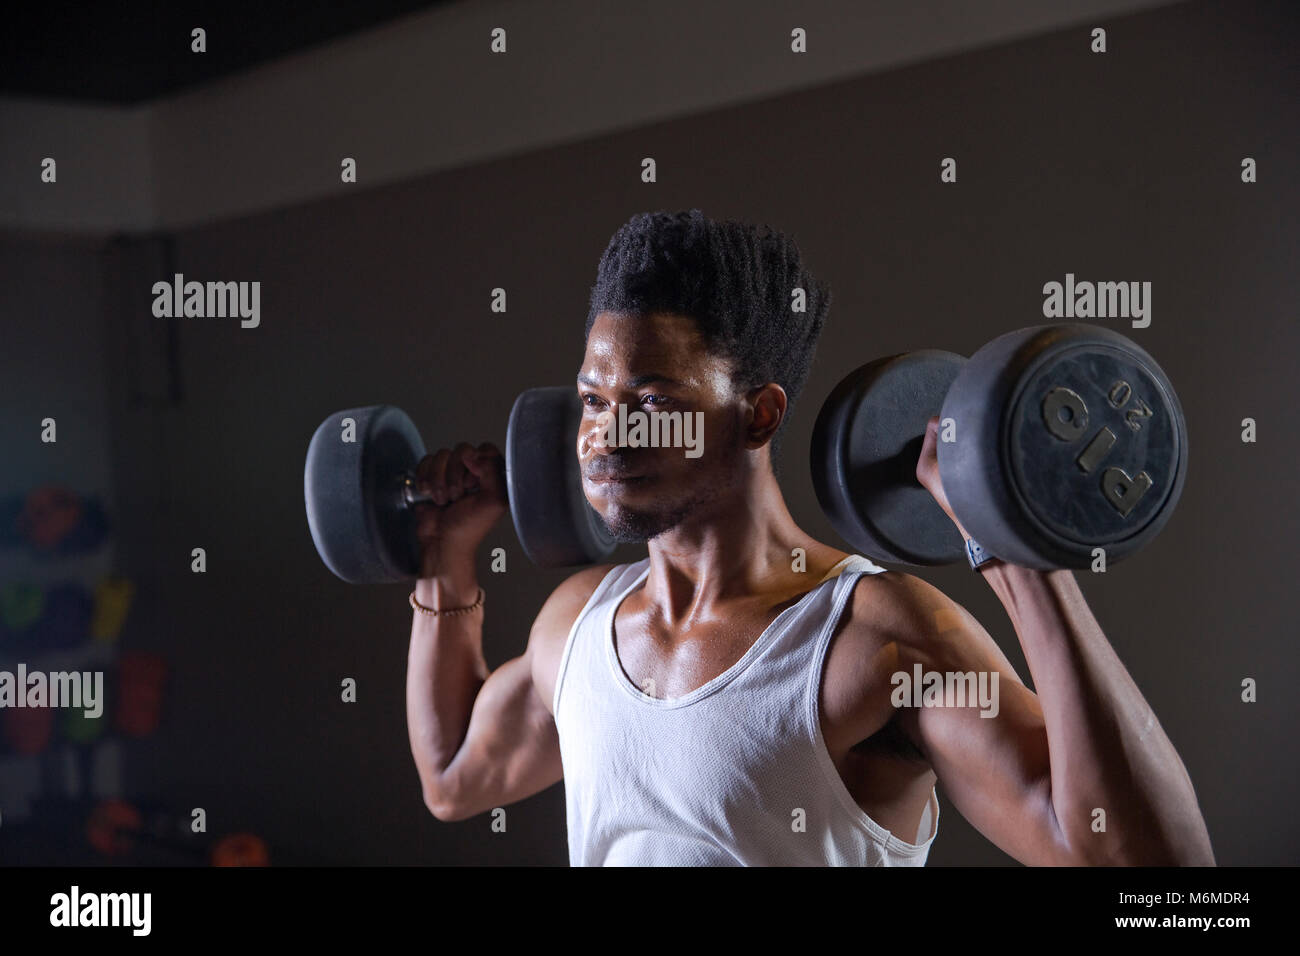 African athlete lifting weights in gym Stock Photo